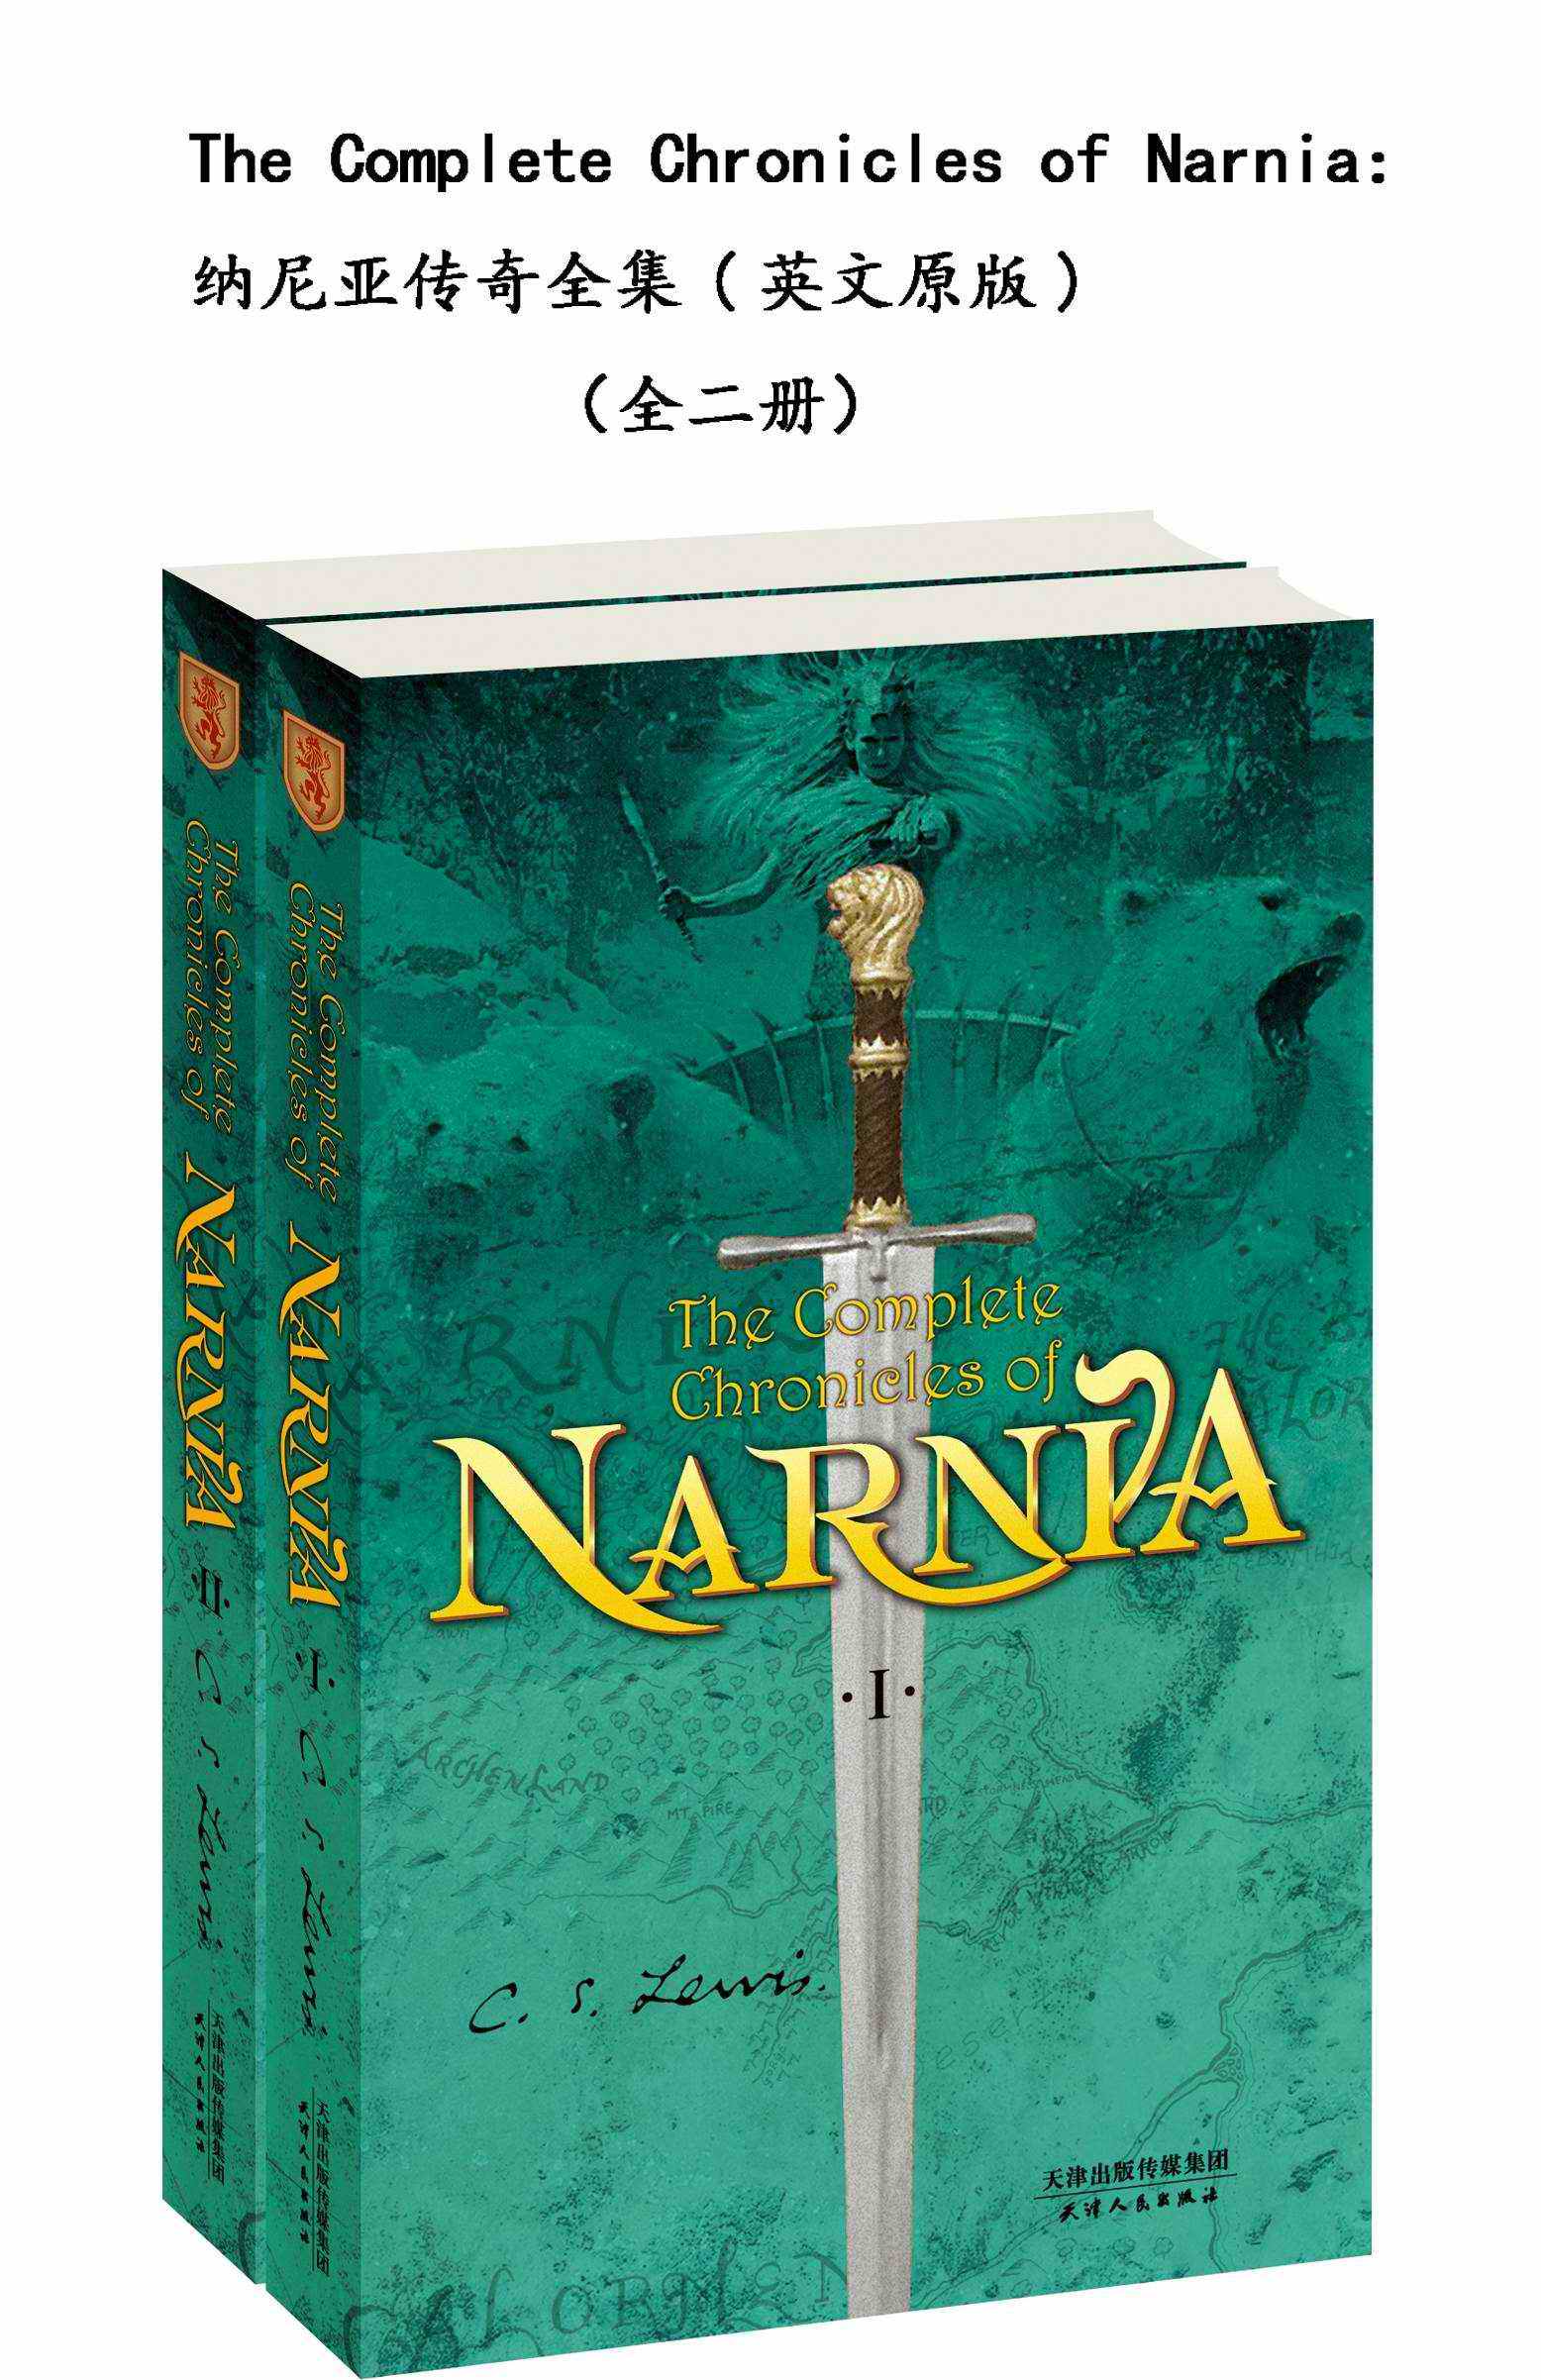 The Complete Chronicles of Narnia：纳尼亚传奇全集(英文原版)（全二册）